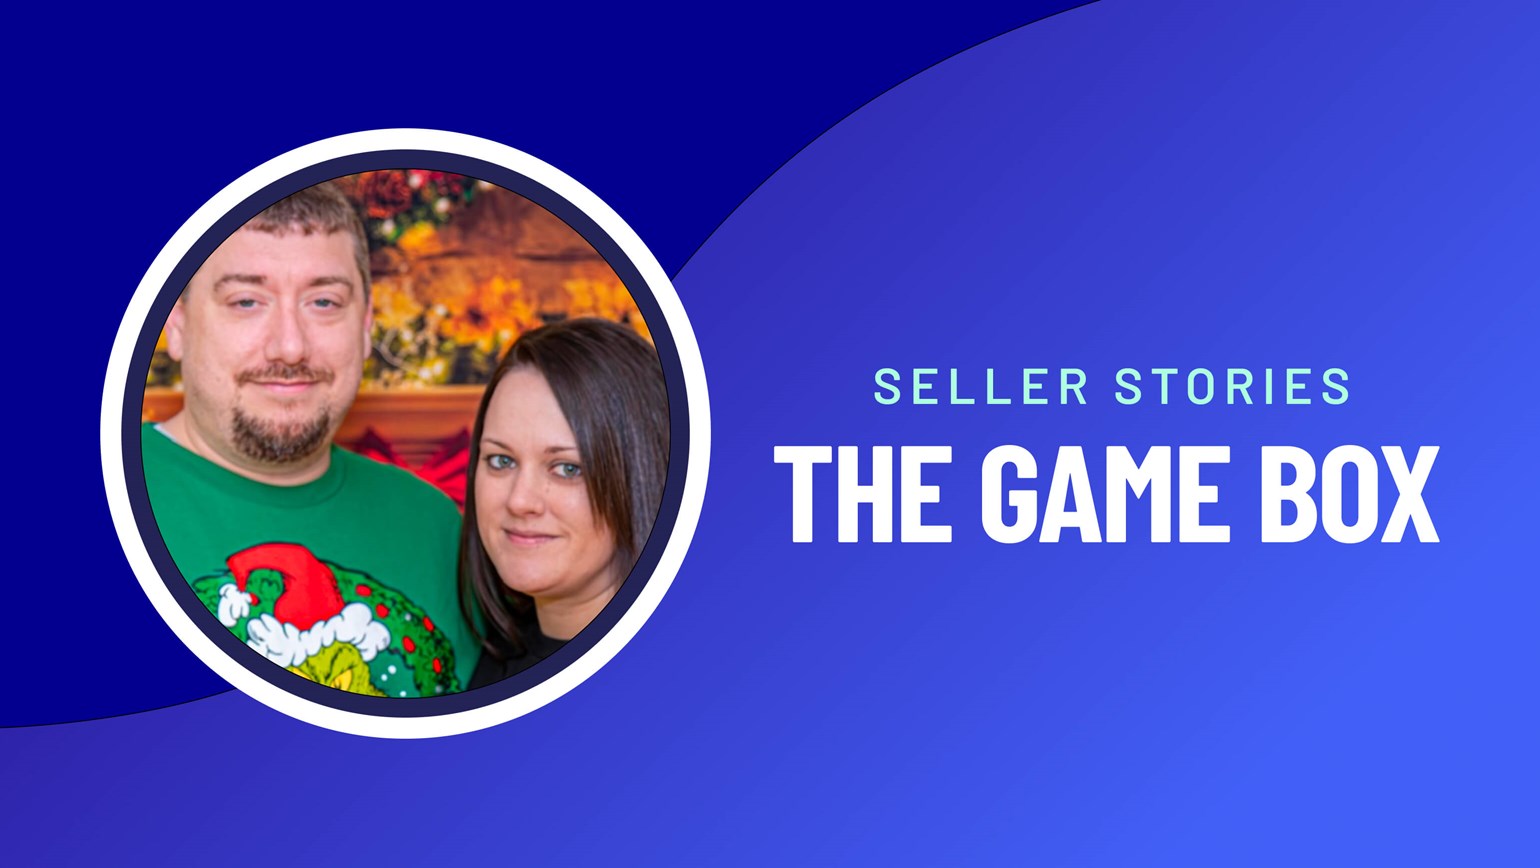 From Passionate Gamers to Local Game Store: Meet The Game Box